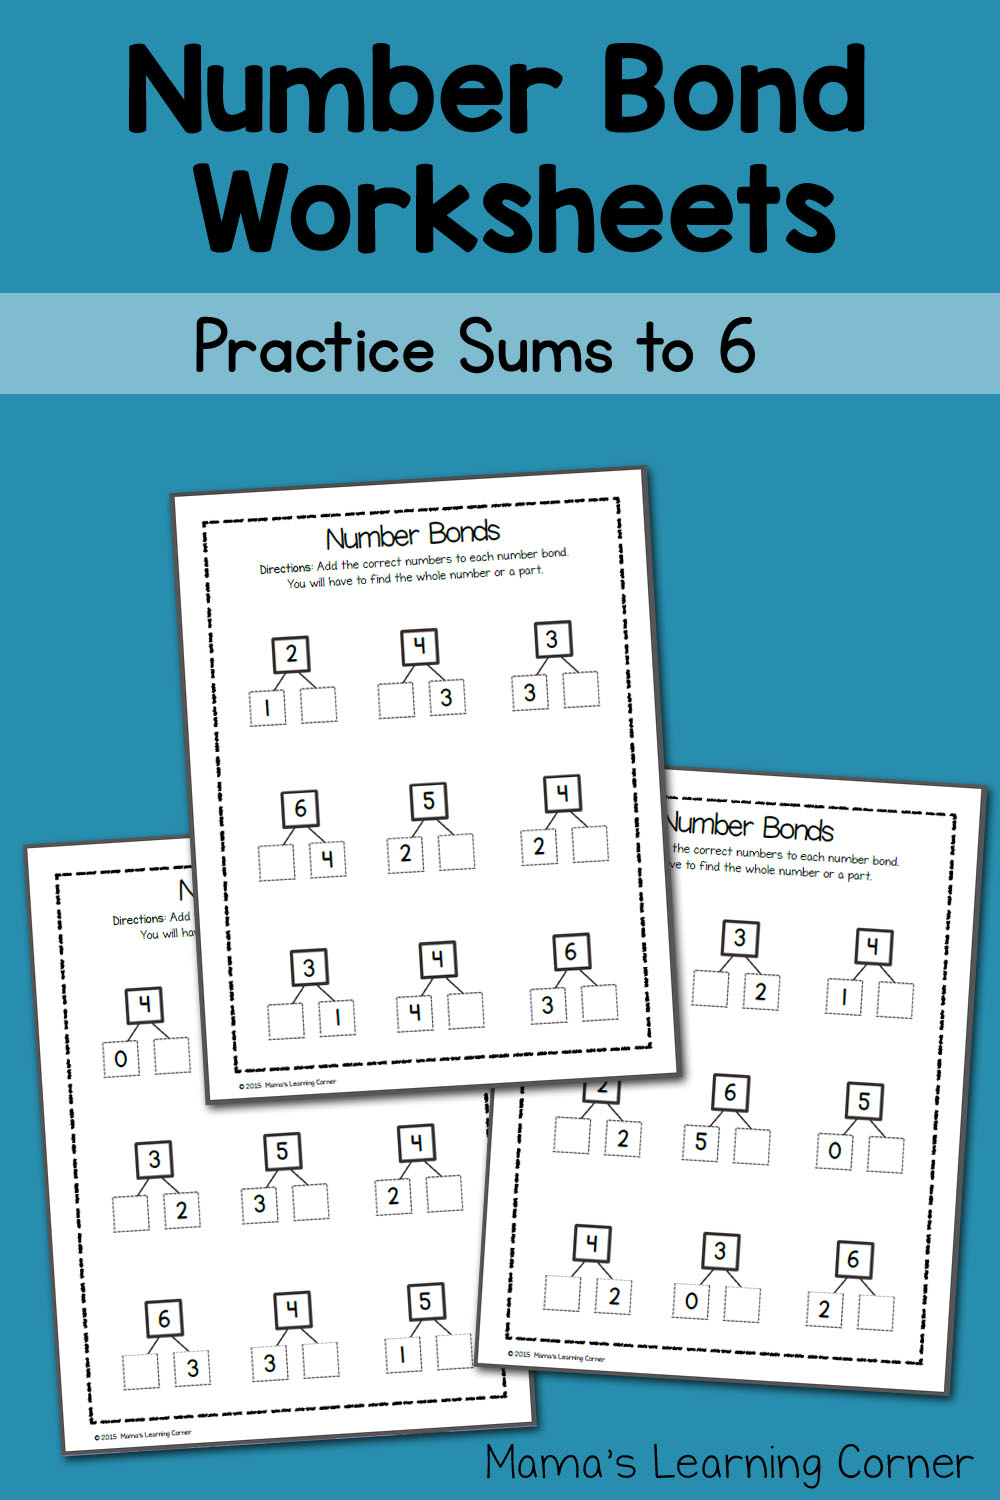 Number Bond Worksheets Sums To 6 Mamas Learning Corner